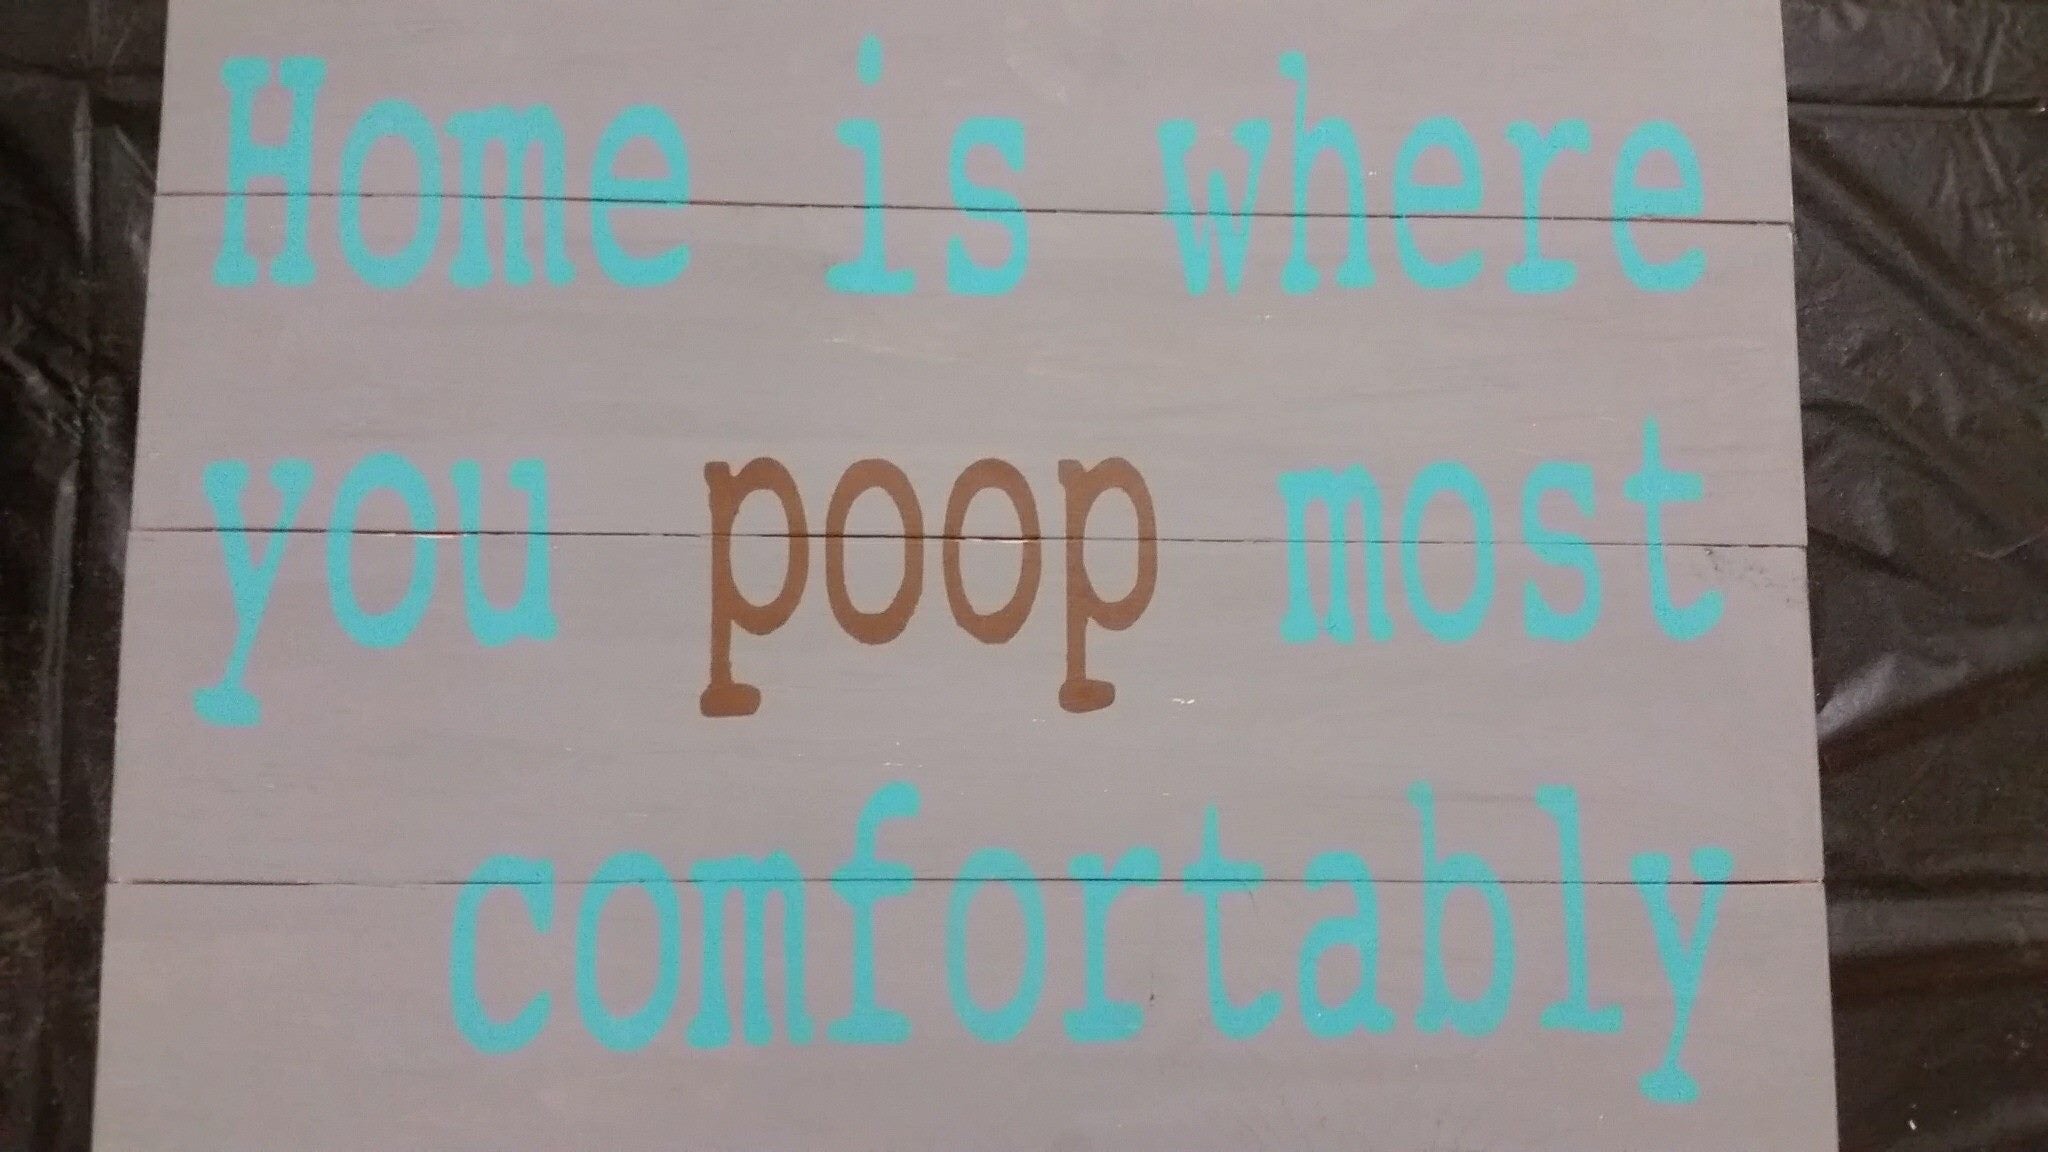 Home is where you poop most comfortably